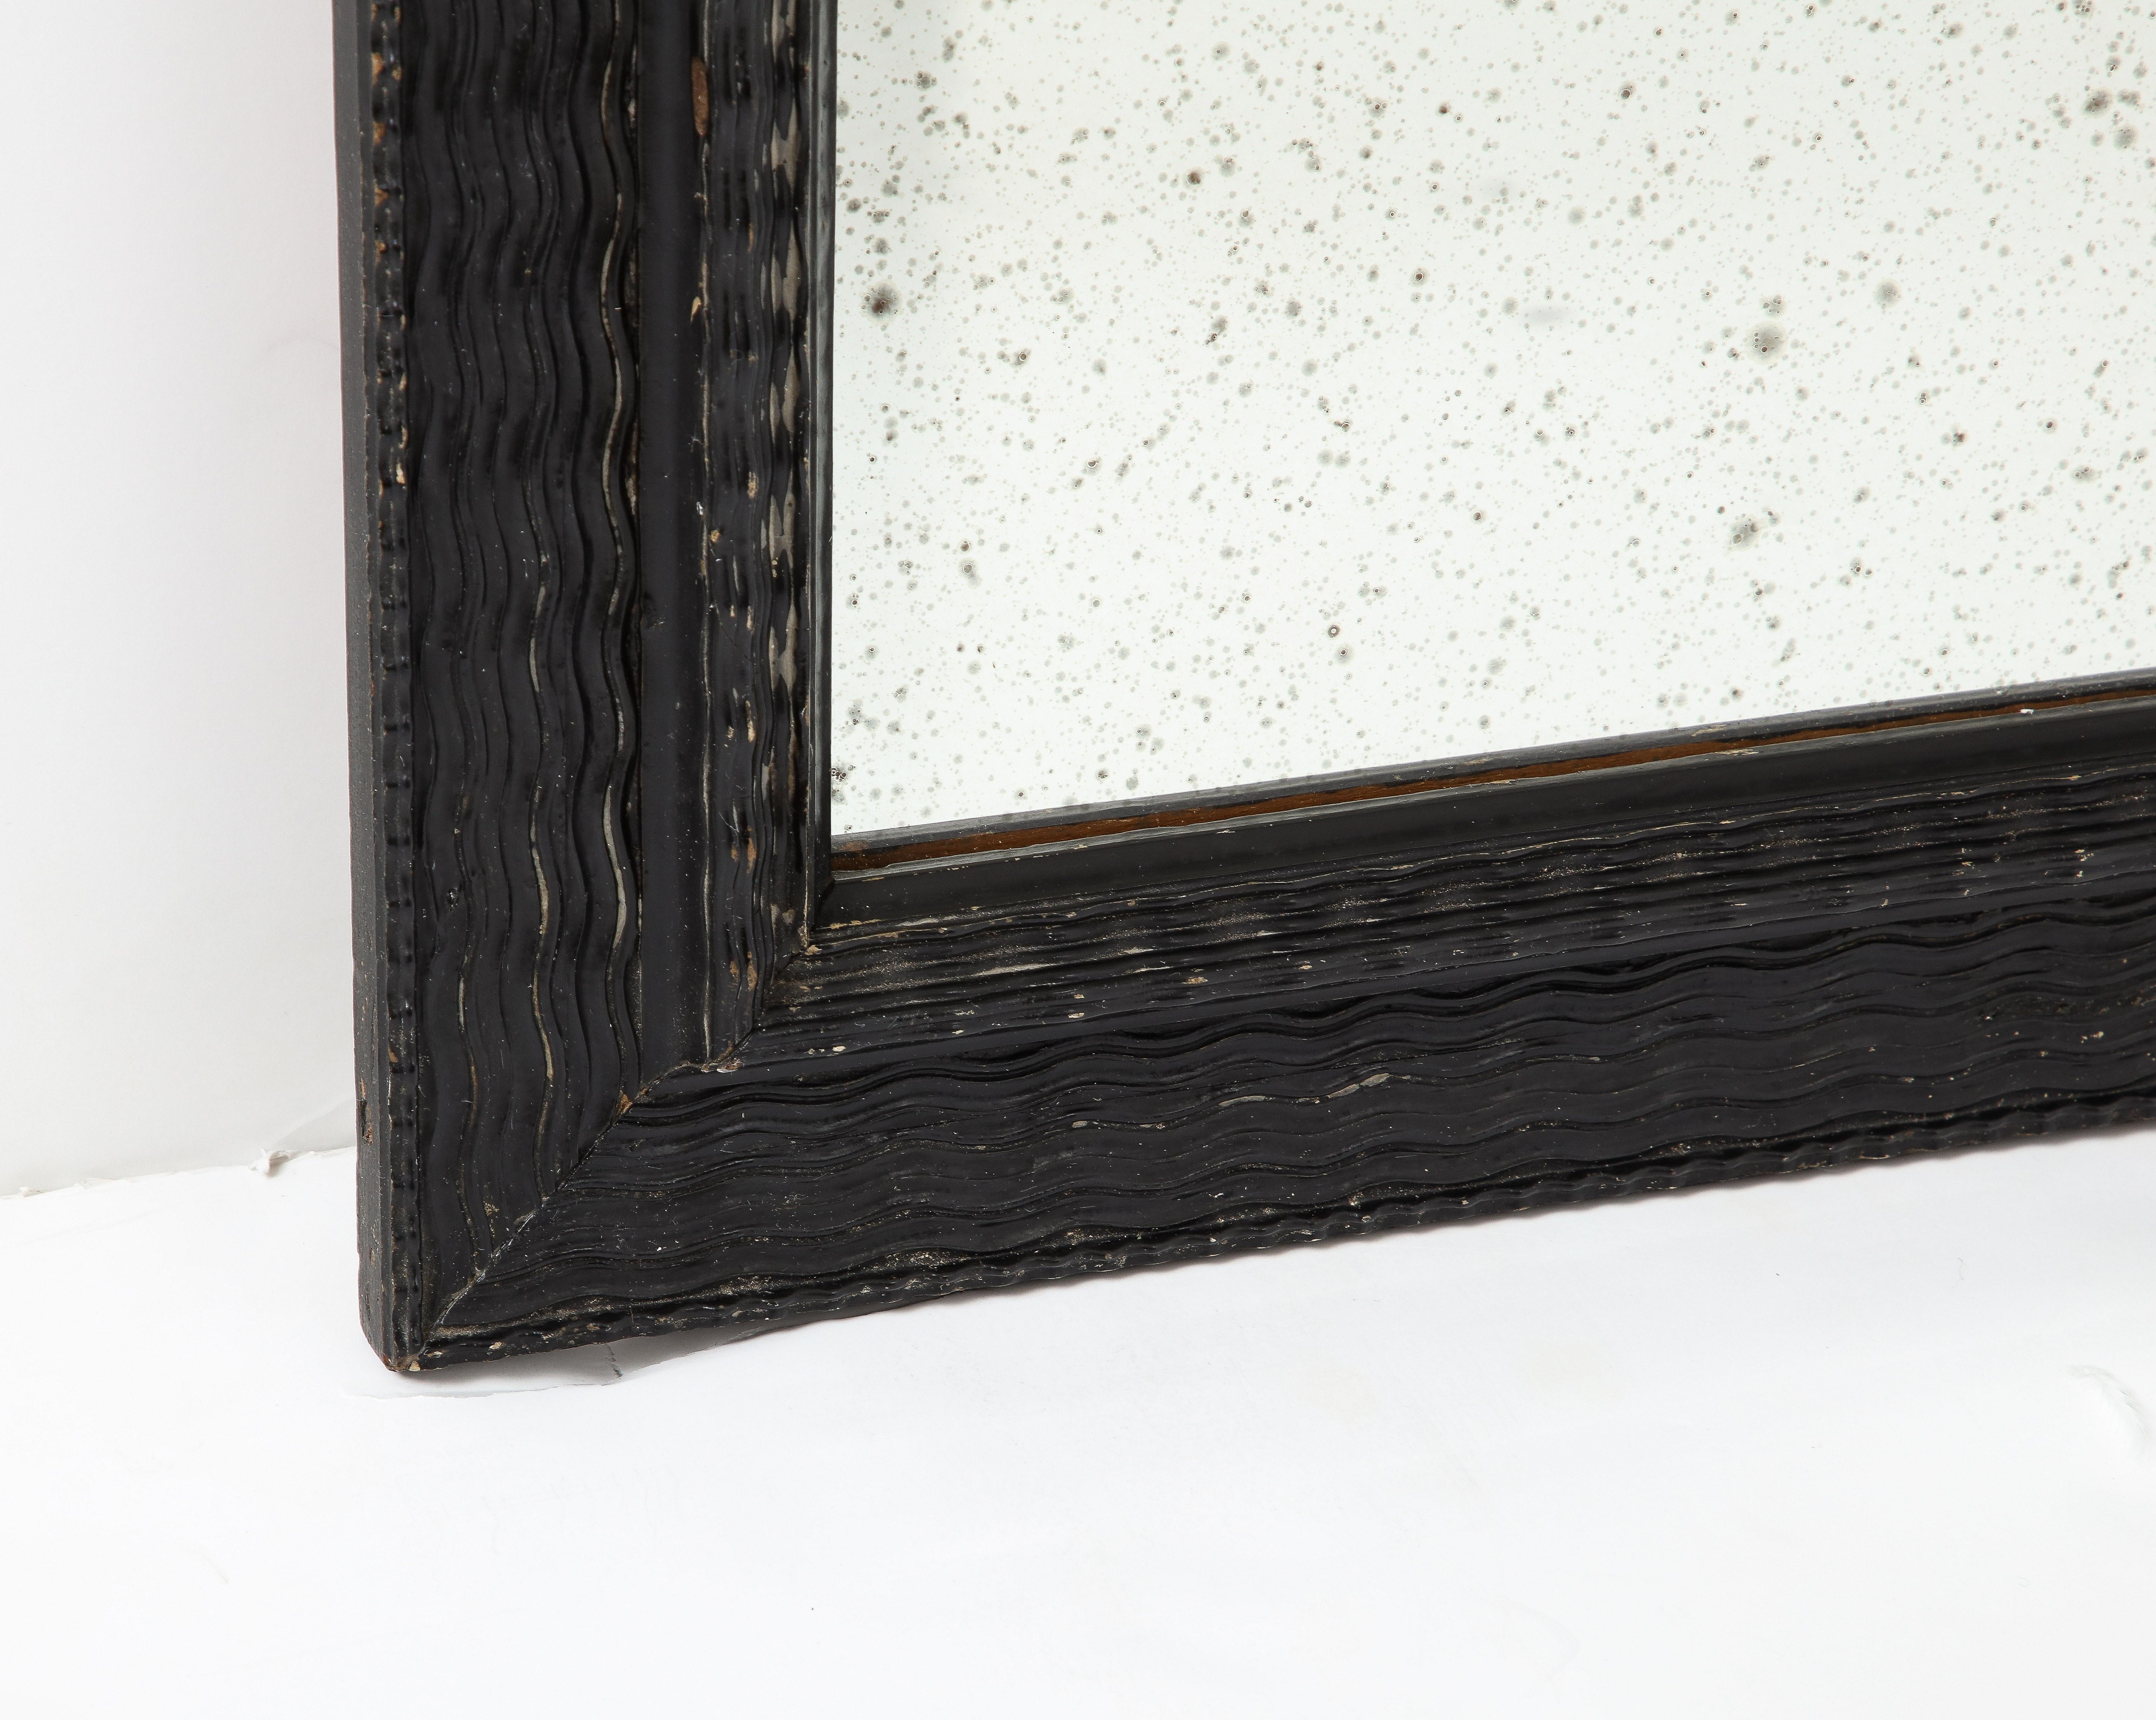 Italian Baroque Manner Ebonized and Ripple Carved Mirror Frame, circa 1900 For Sale 7